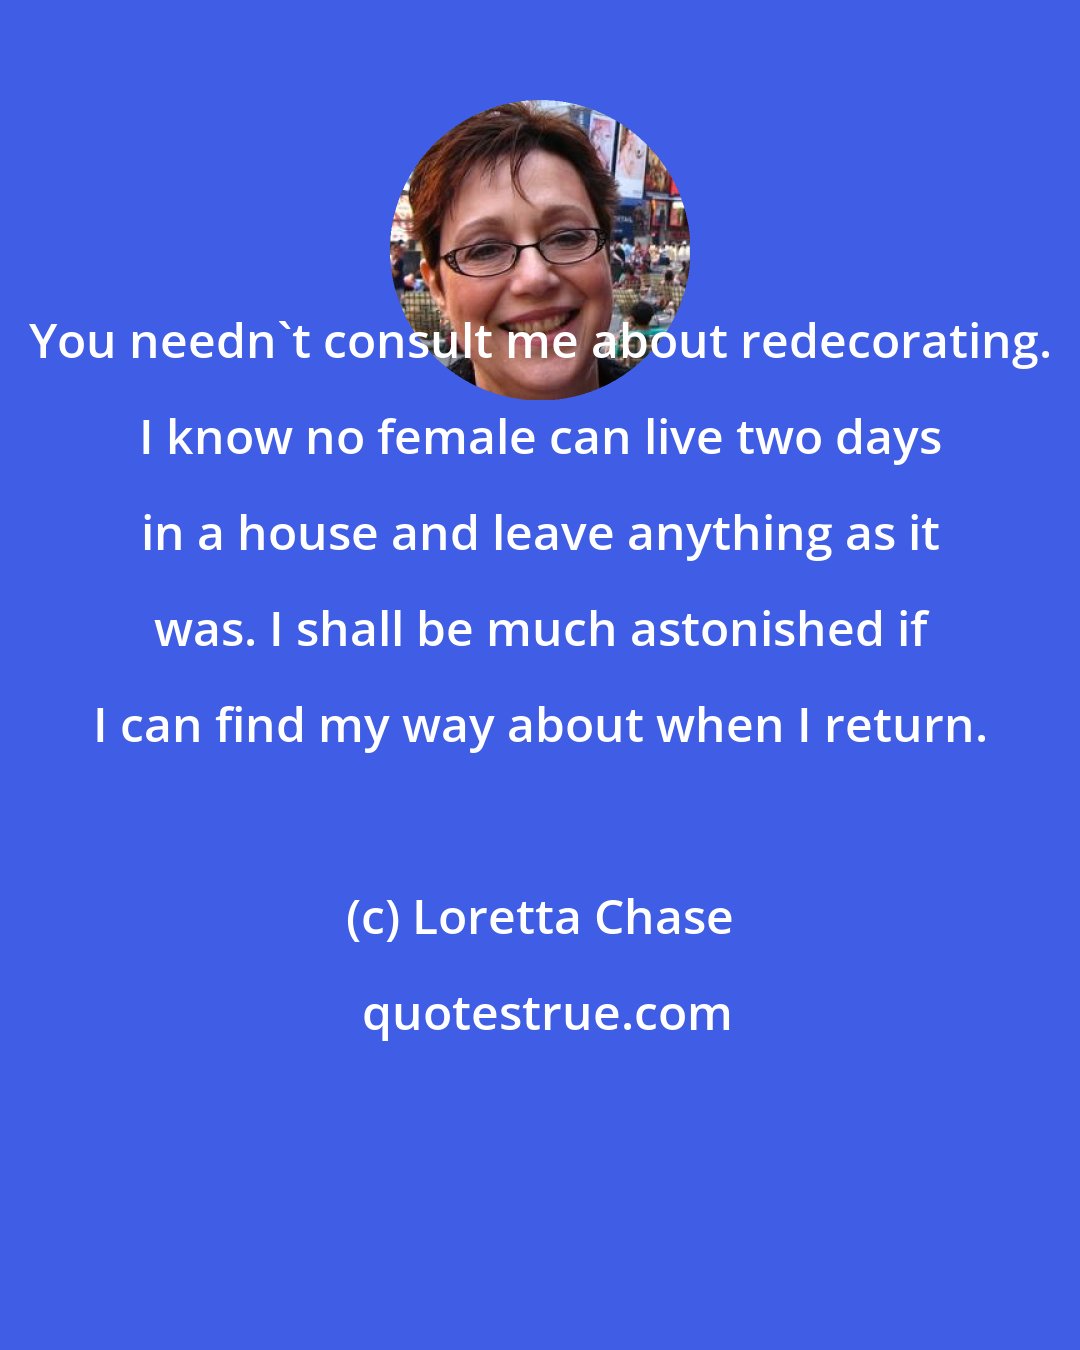 Loretta Chase: You needn't consult me about redecorating. I know no female can live two days in a house and leave anything as it was. I shall be much astonished if I can find my way about when I return.